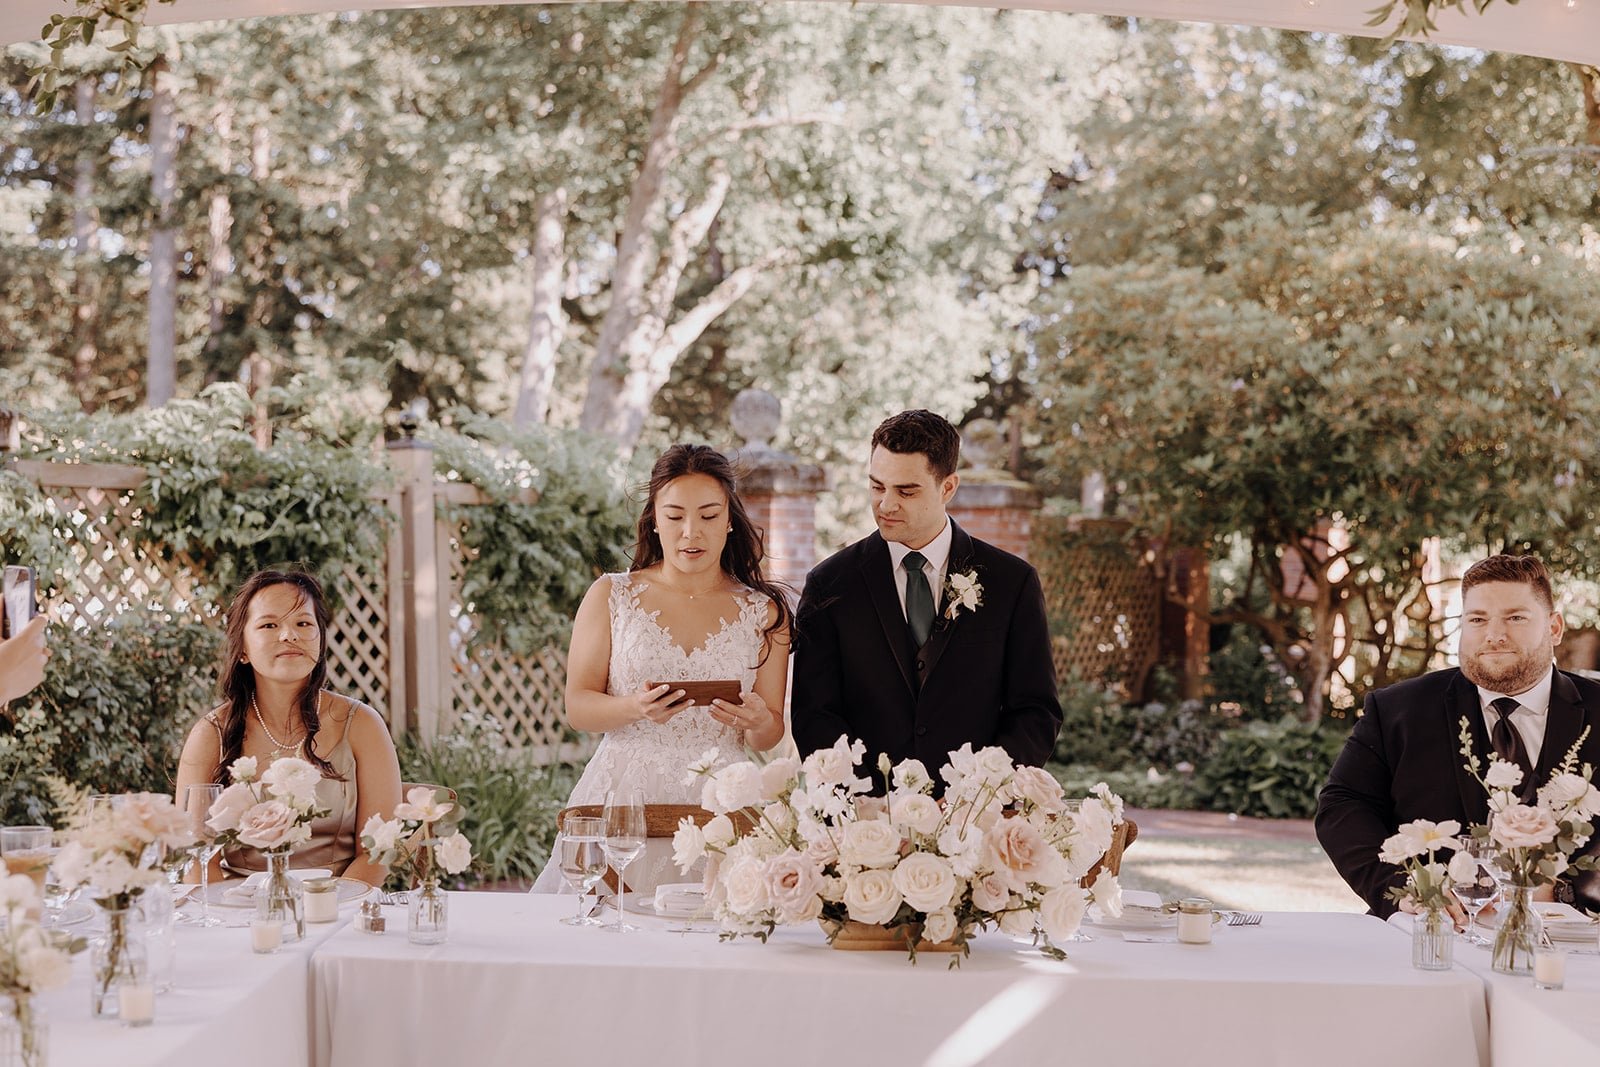 Bride and groom address their guests at Lairmont Manor wedding reception in Washington